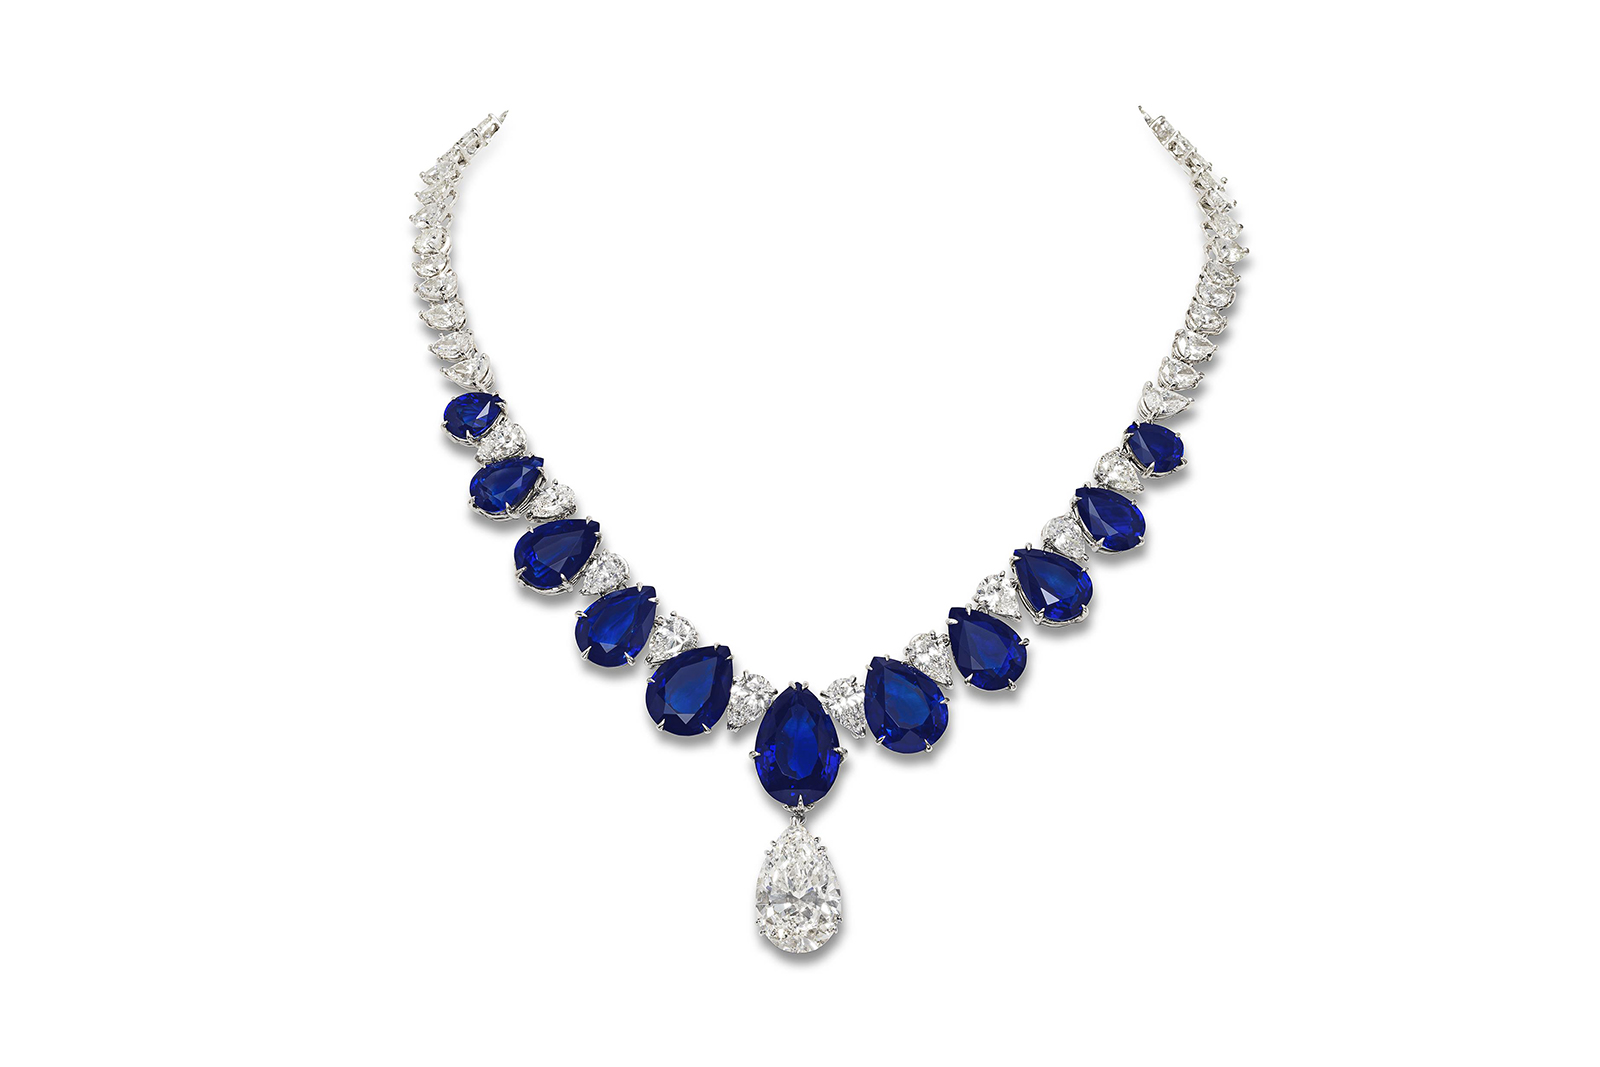 A remarkable feat of contemporary design: Jahan's natural sapphire and diamond necklace